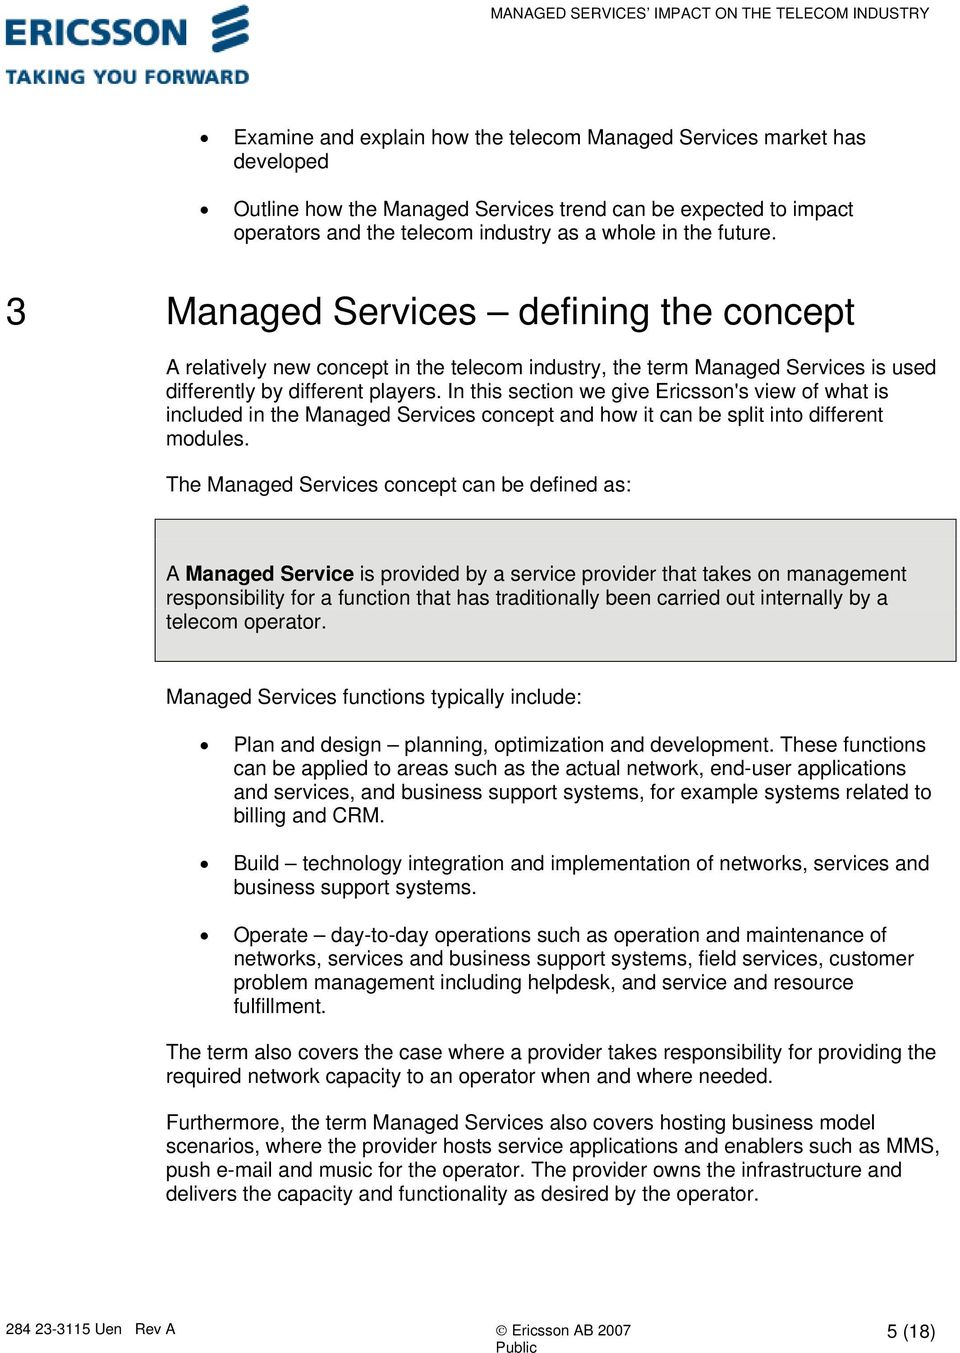 In this section we give Ericsson's view of what is included in the Managed Services concept and how it can be split into different modules.